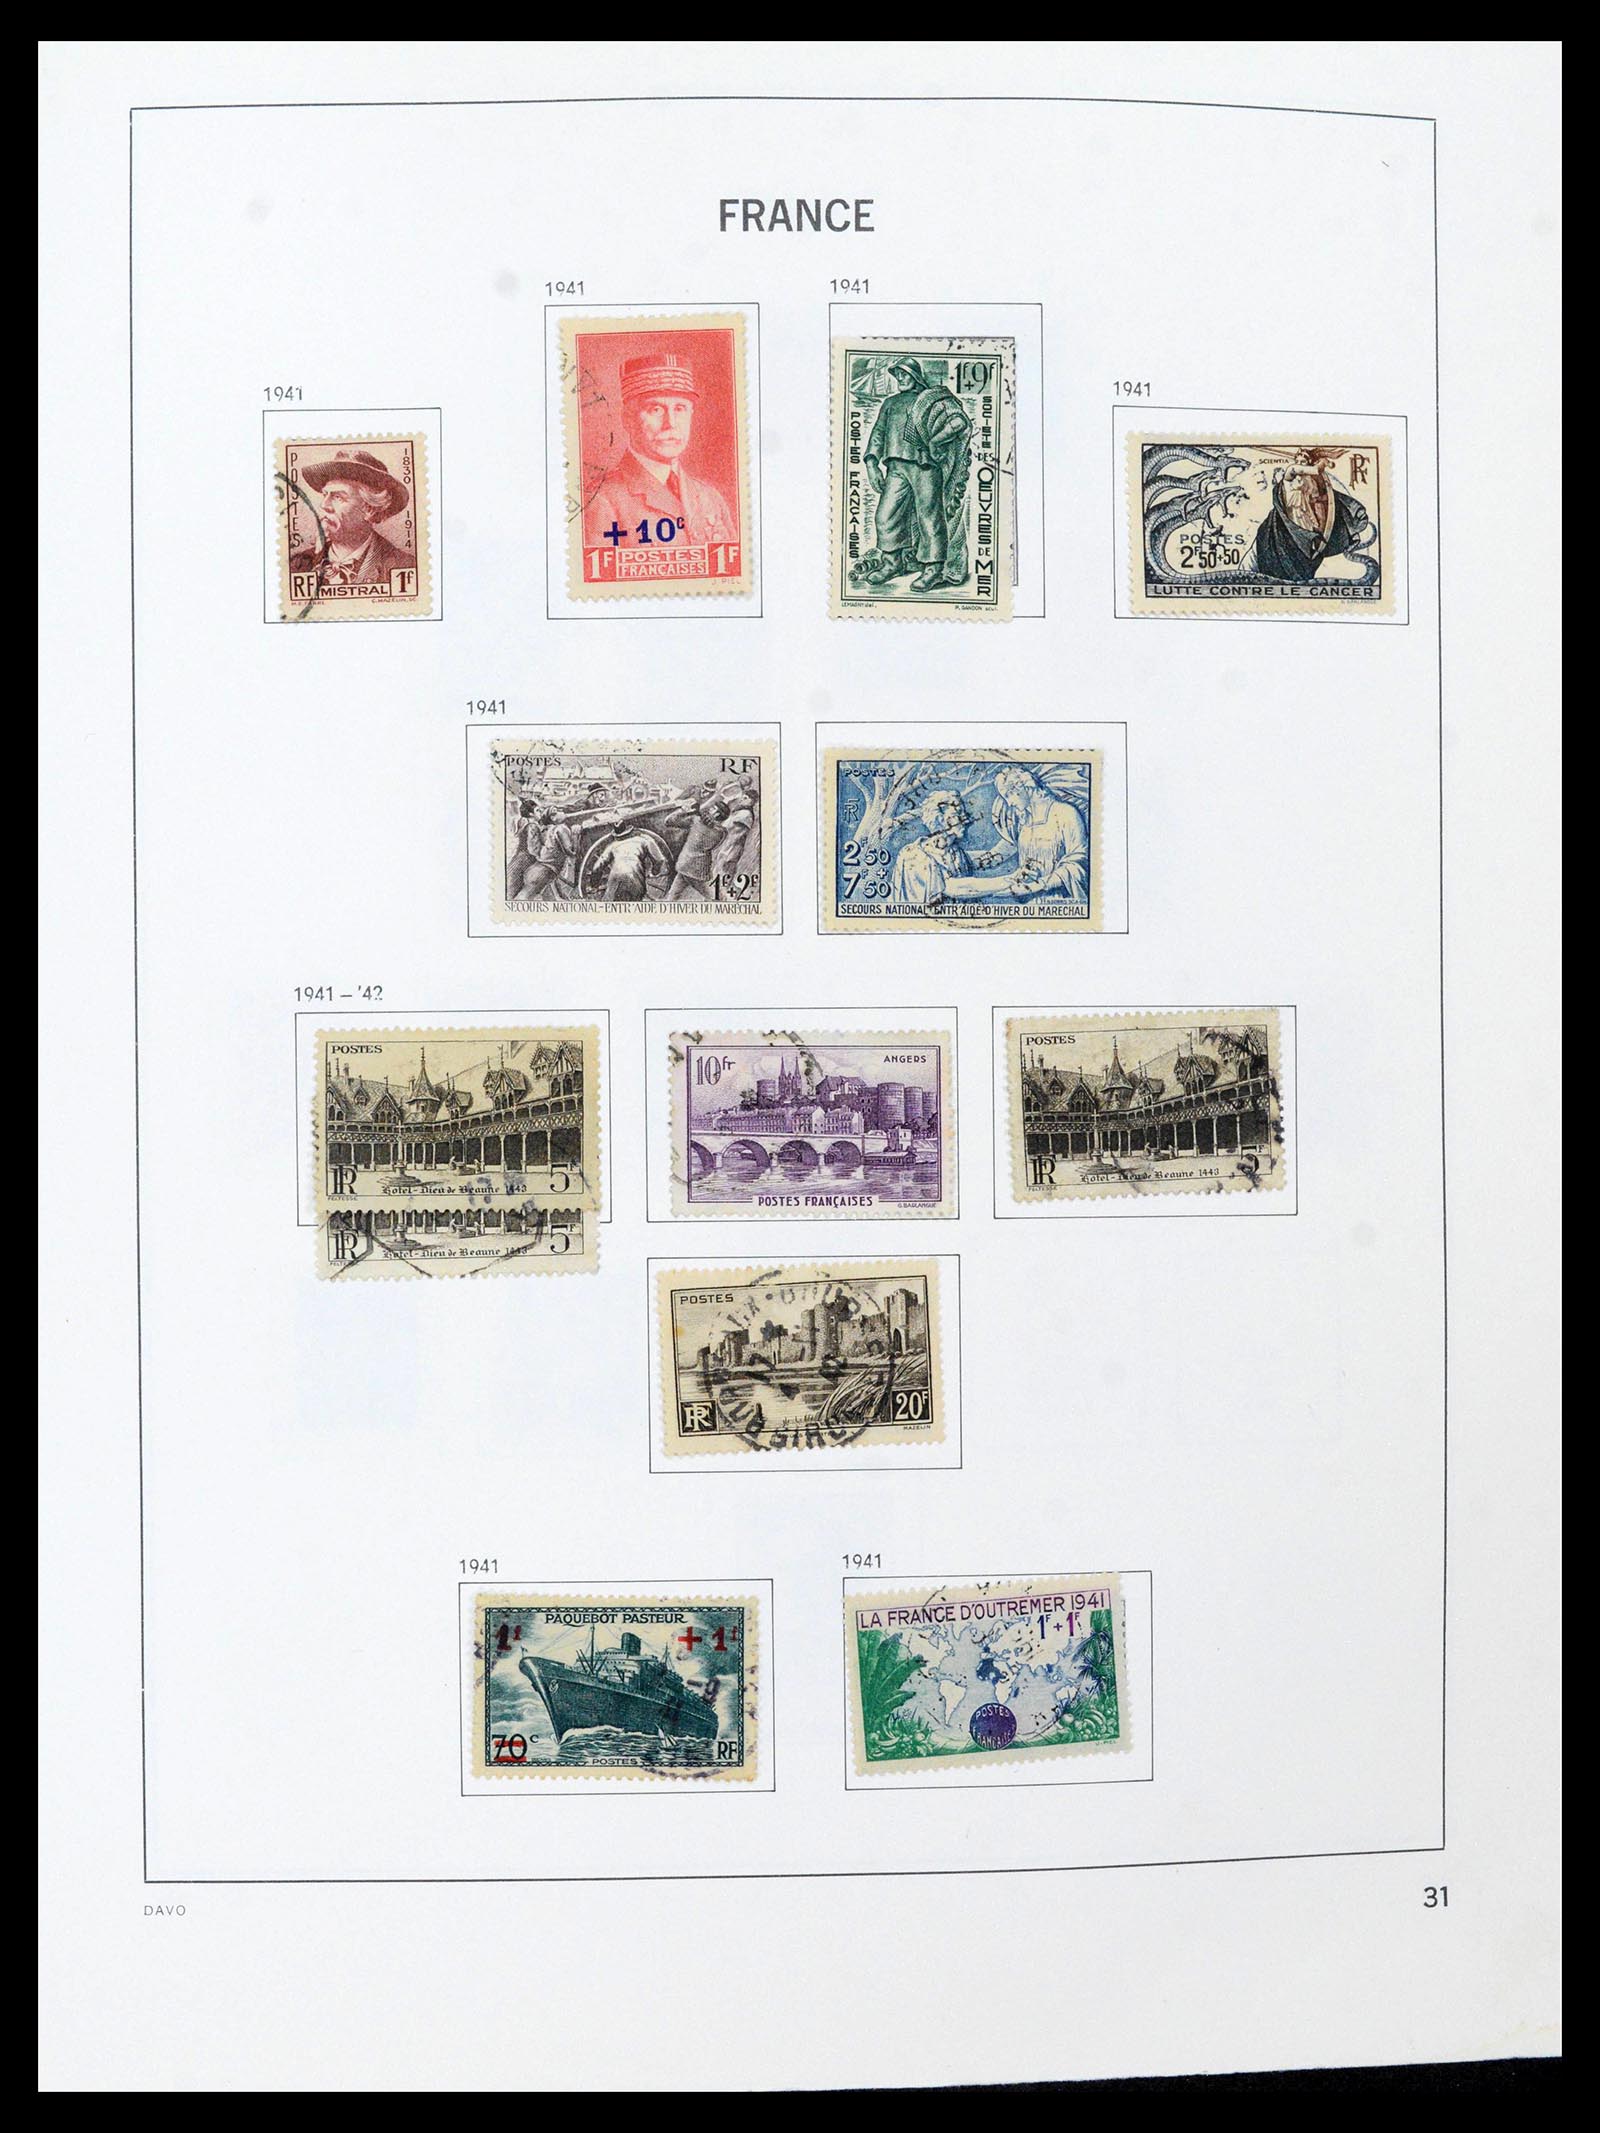 39164 0031 - Stamp collection 39164 France 1849-1981.